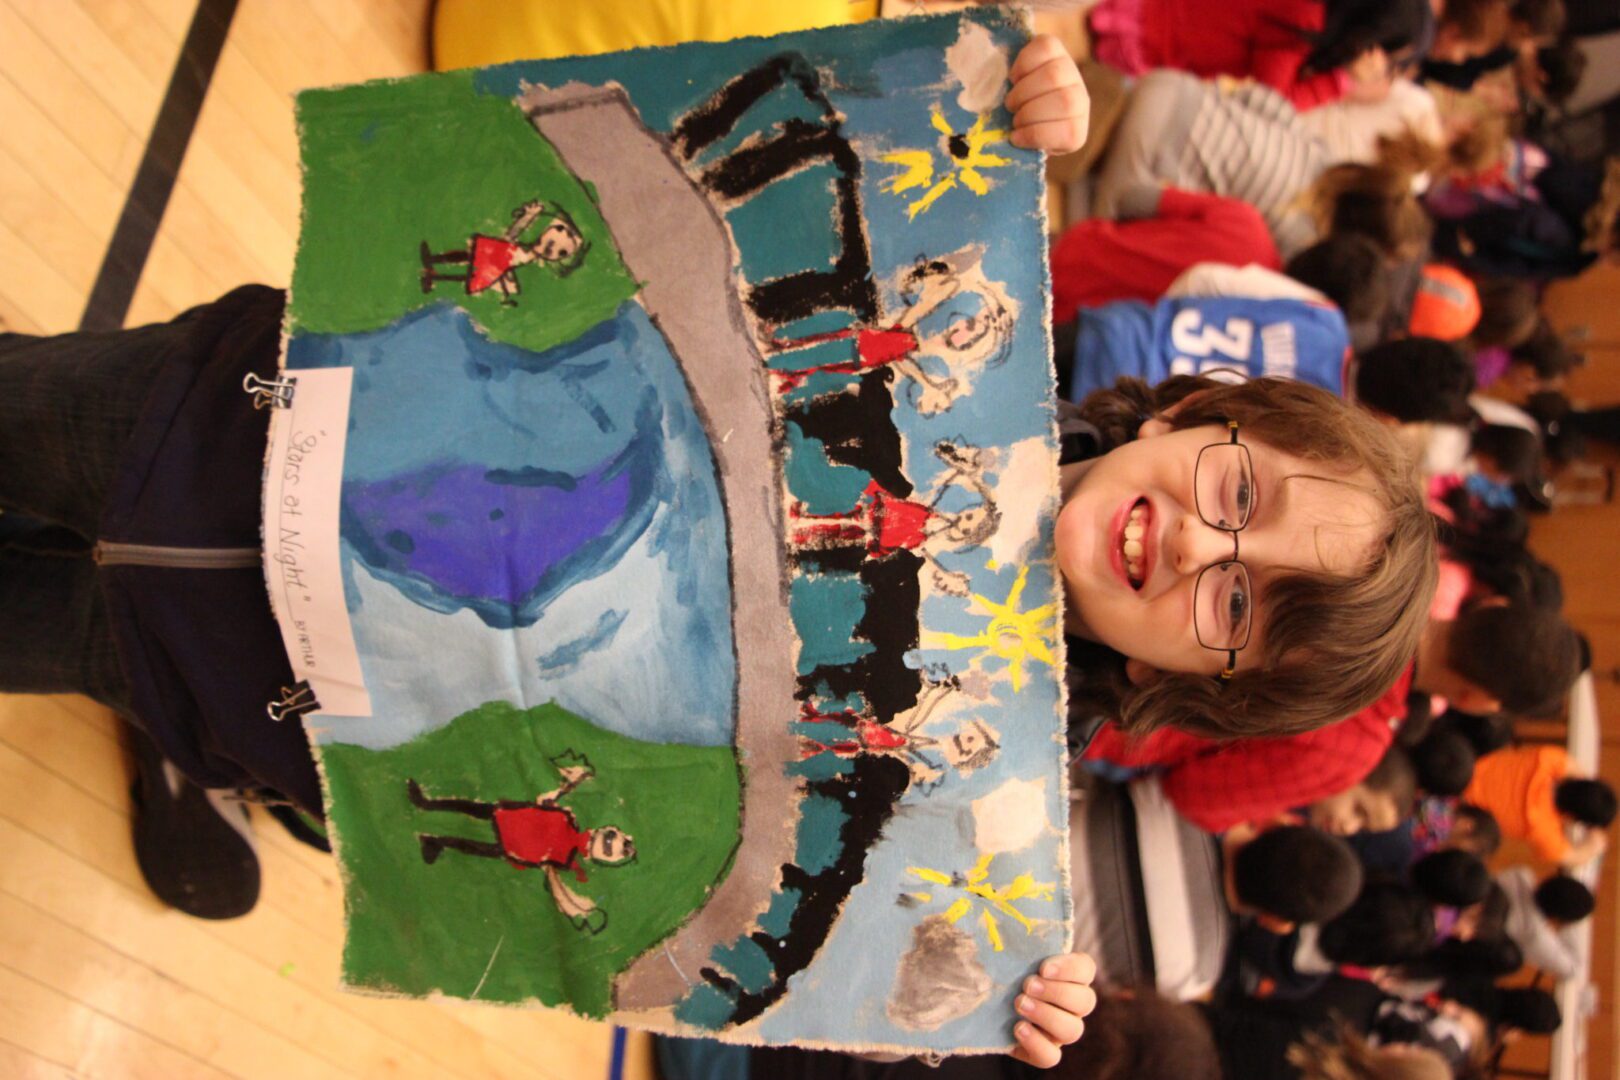 A young girl holding up a drawing in a gym.